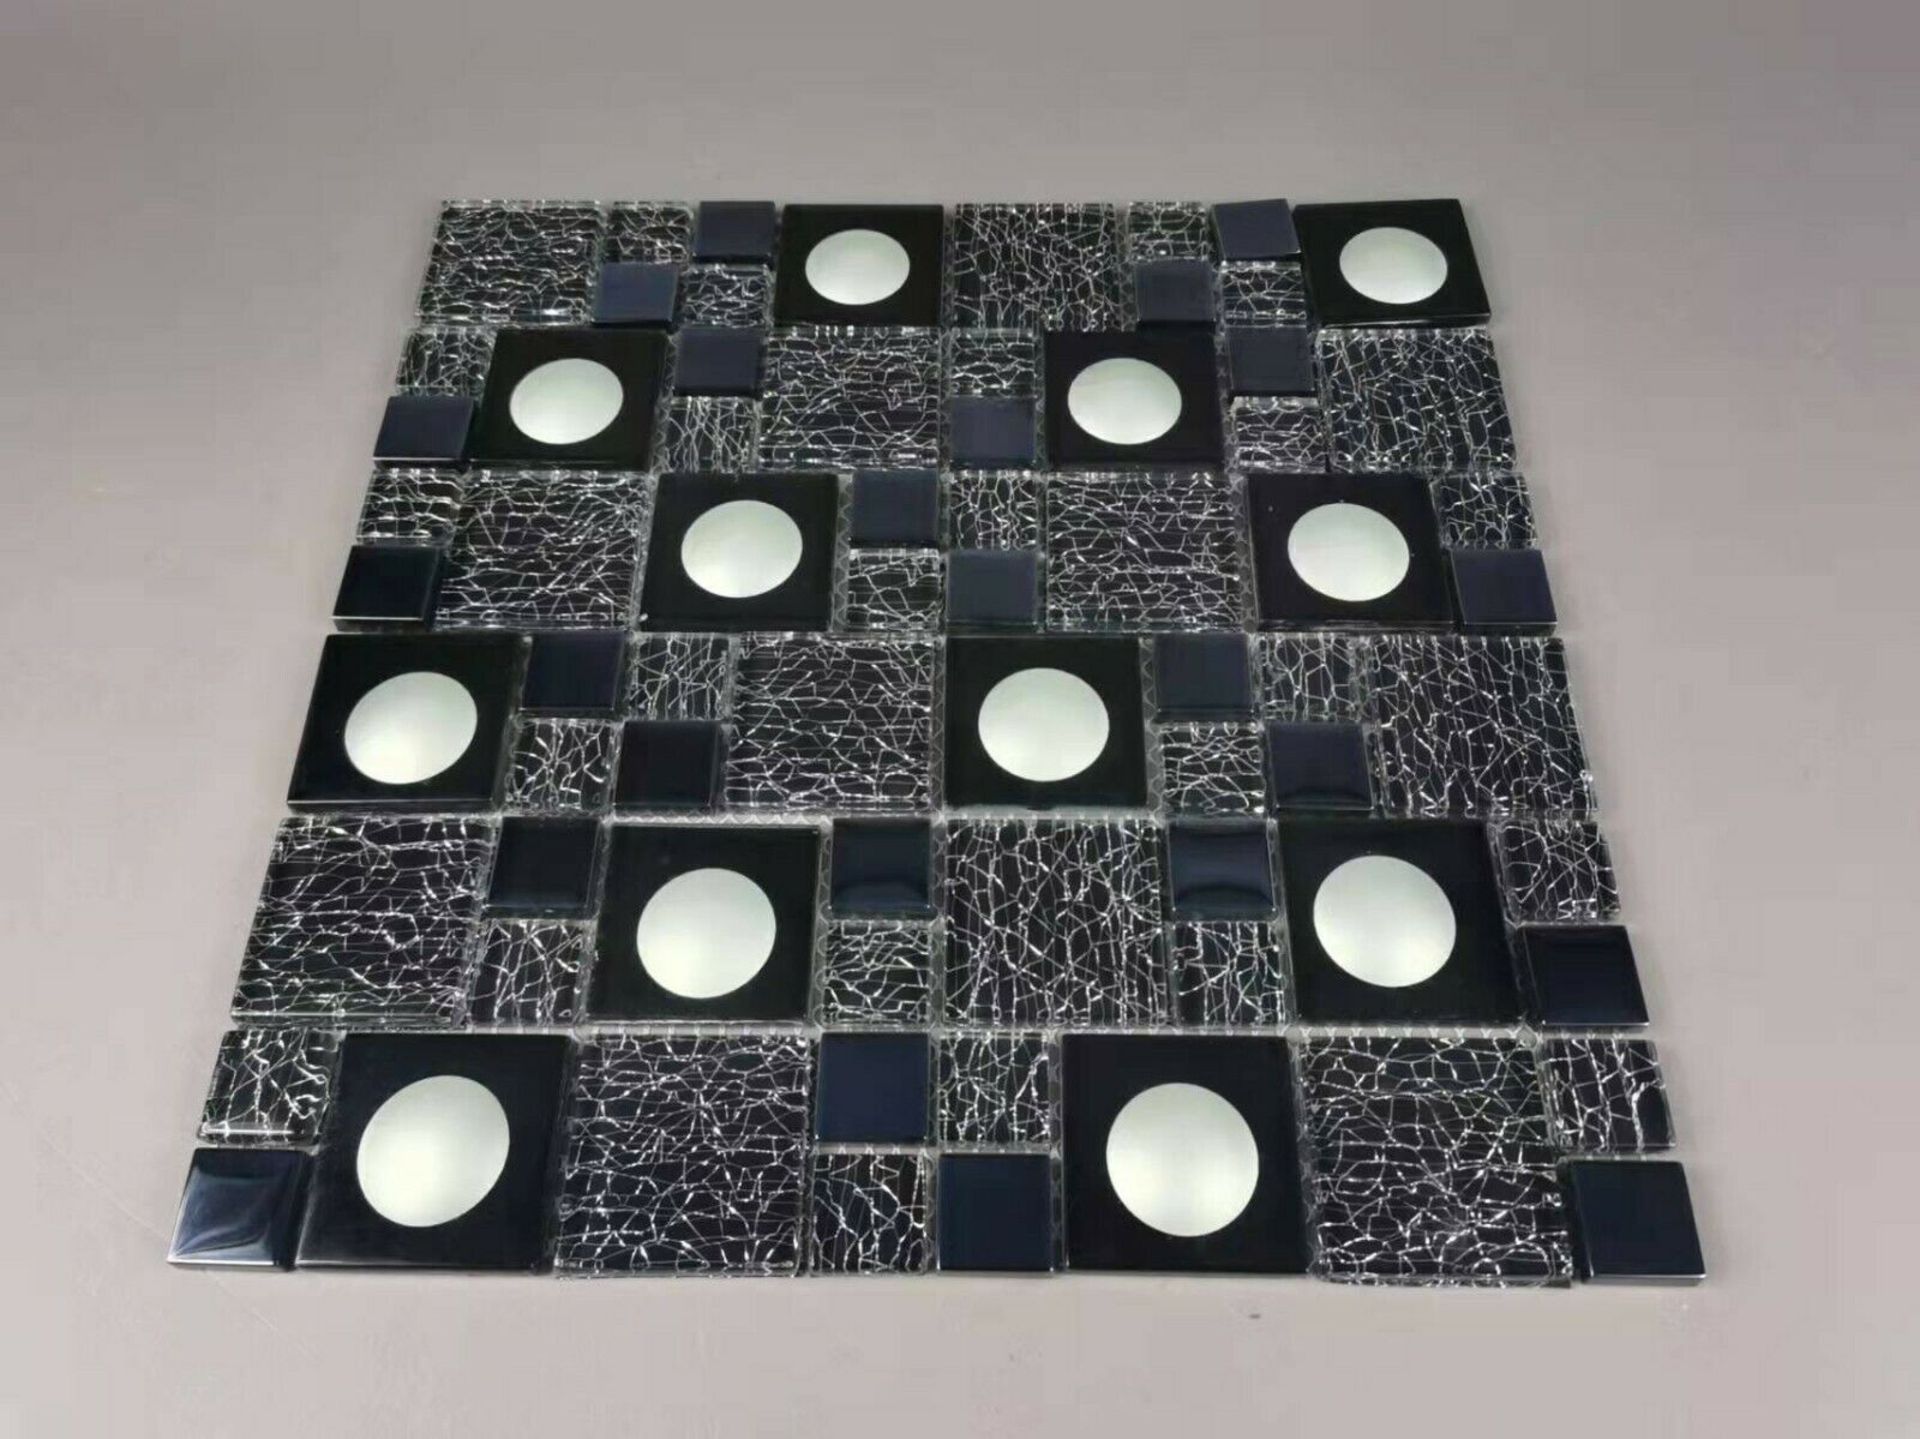 1 Square Metres - High Quality Glass Mosaic Tiles J32 Super Saver 300*300*6mm* 11 Sheets - Image 2 of 4